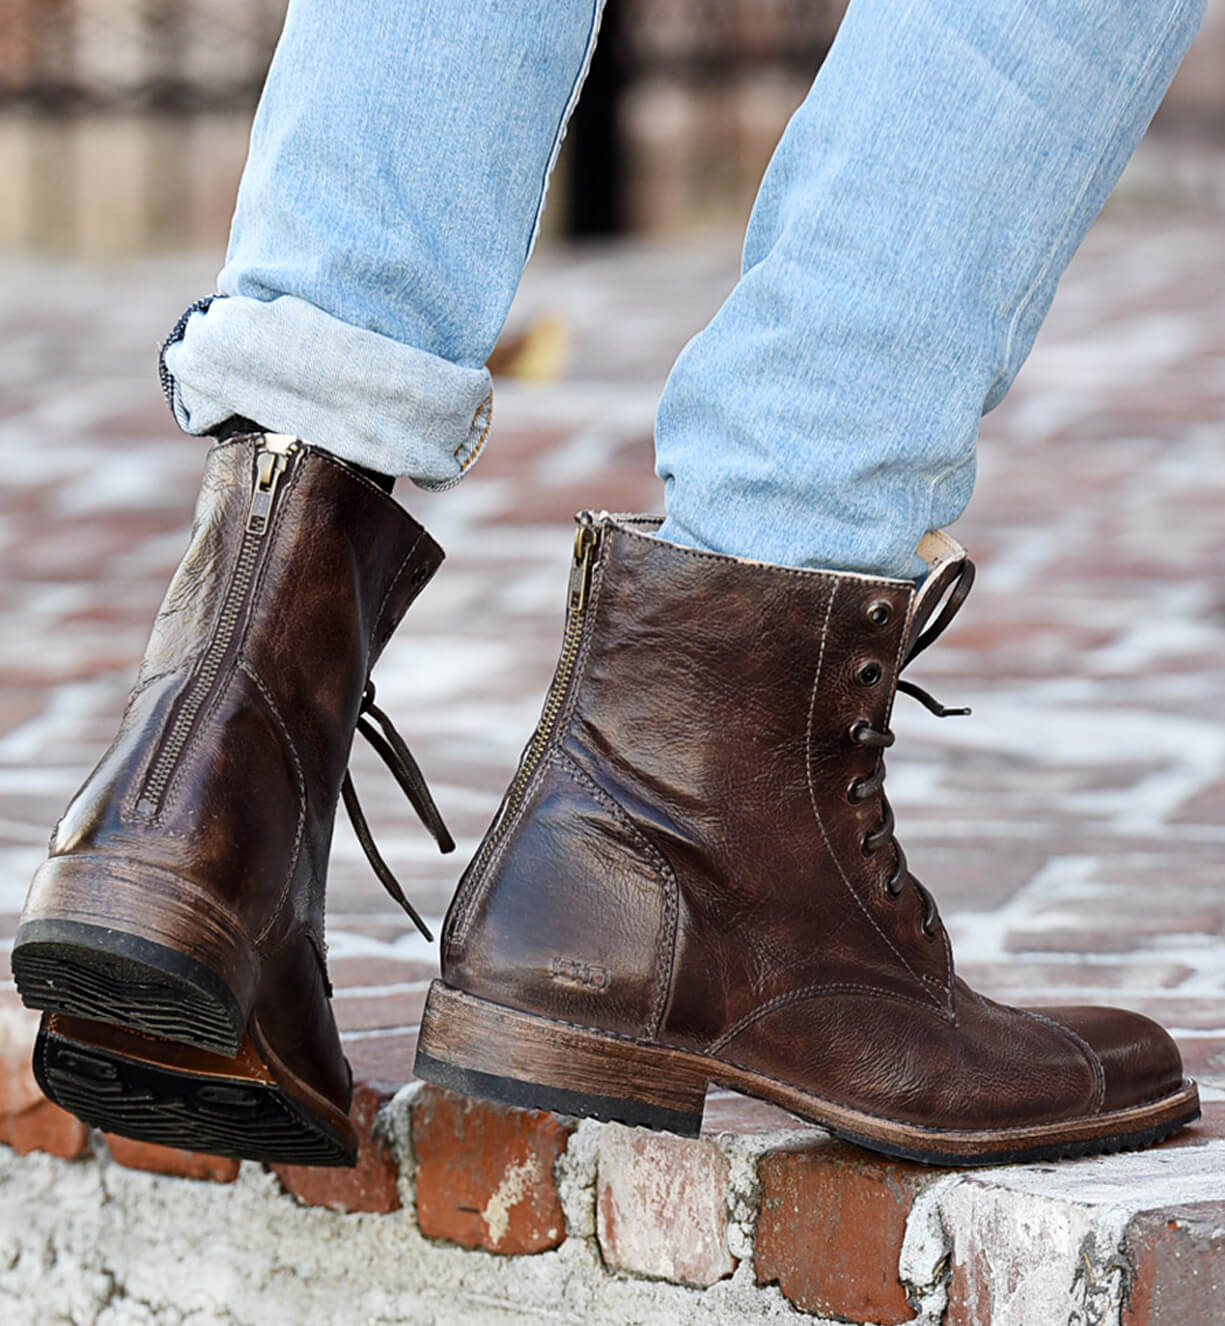 A pair of Protege brown boots by Bed Stu.